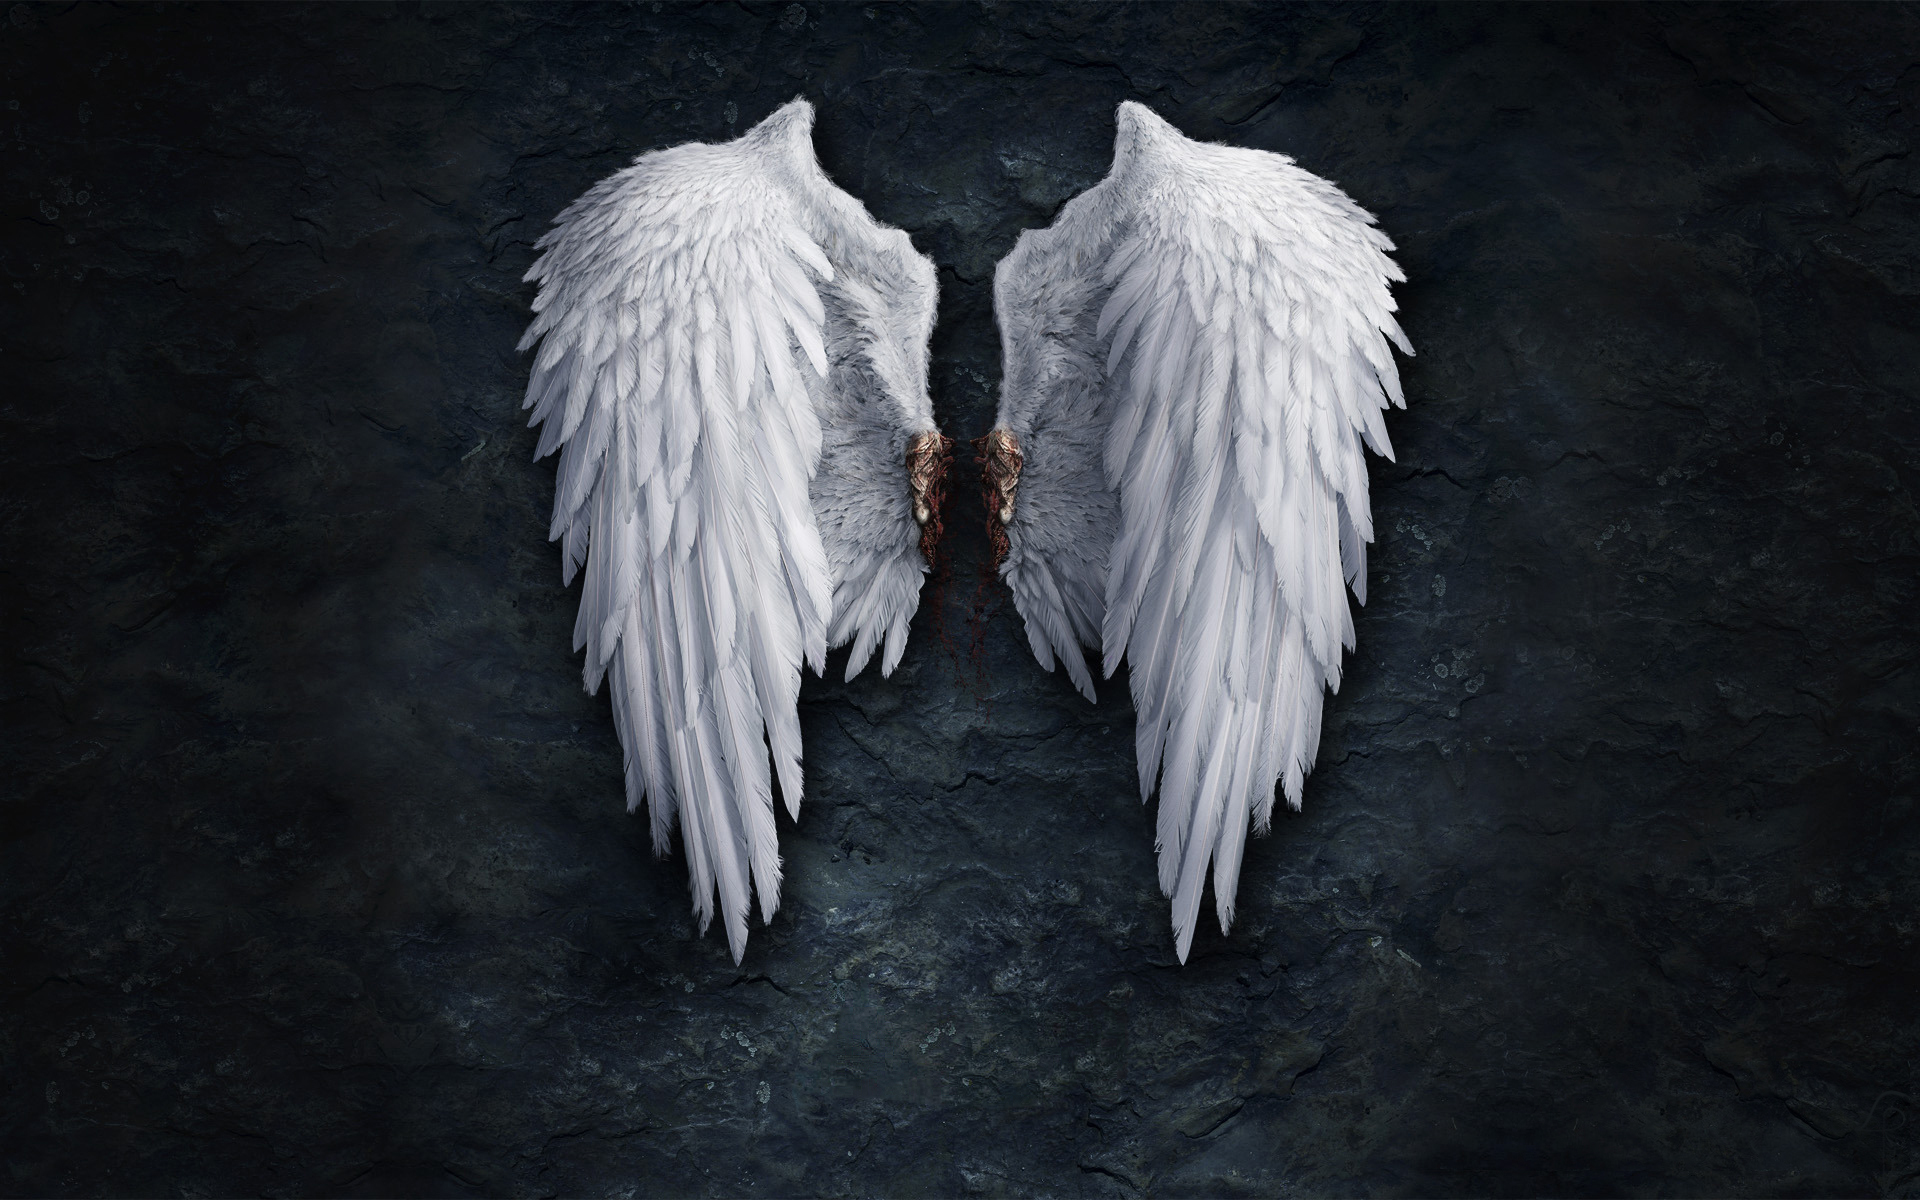 Angel Wings wallpapers and images - wallpapers, pictures, photos